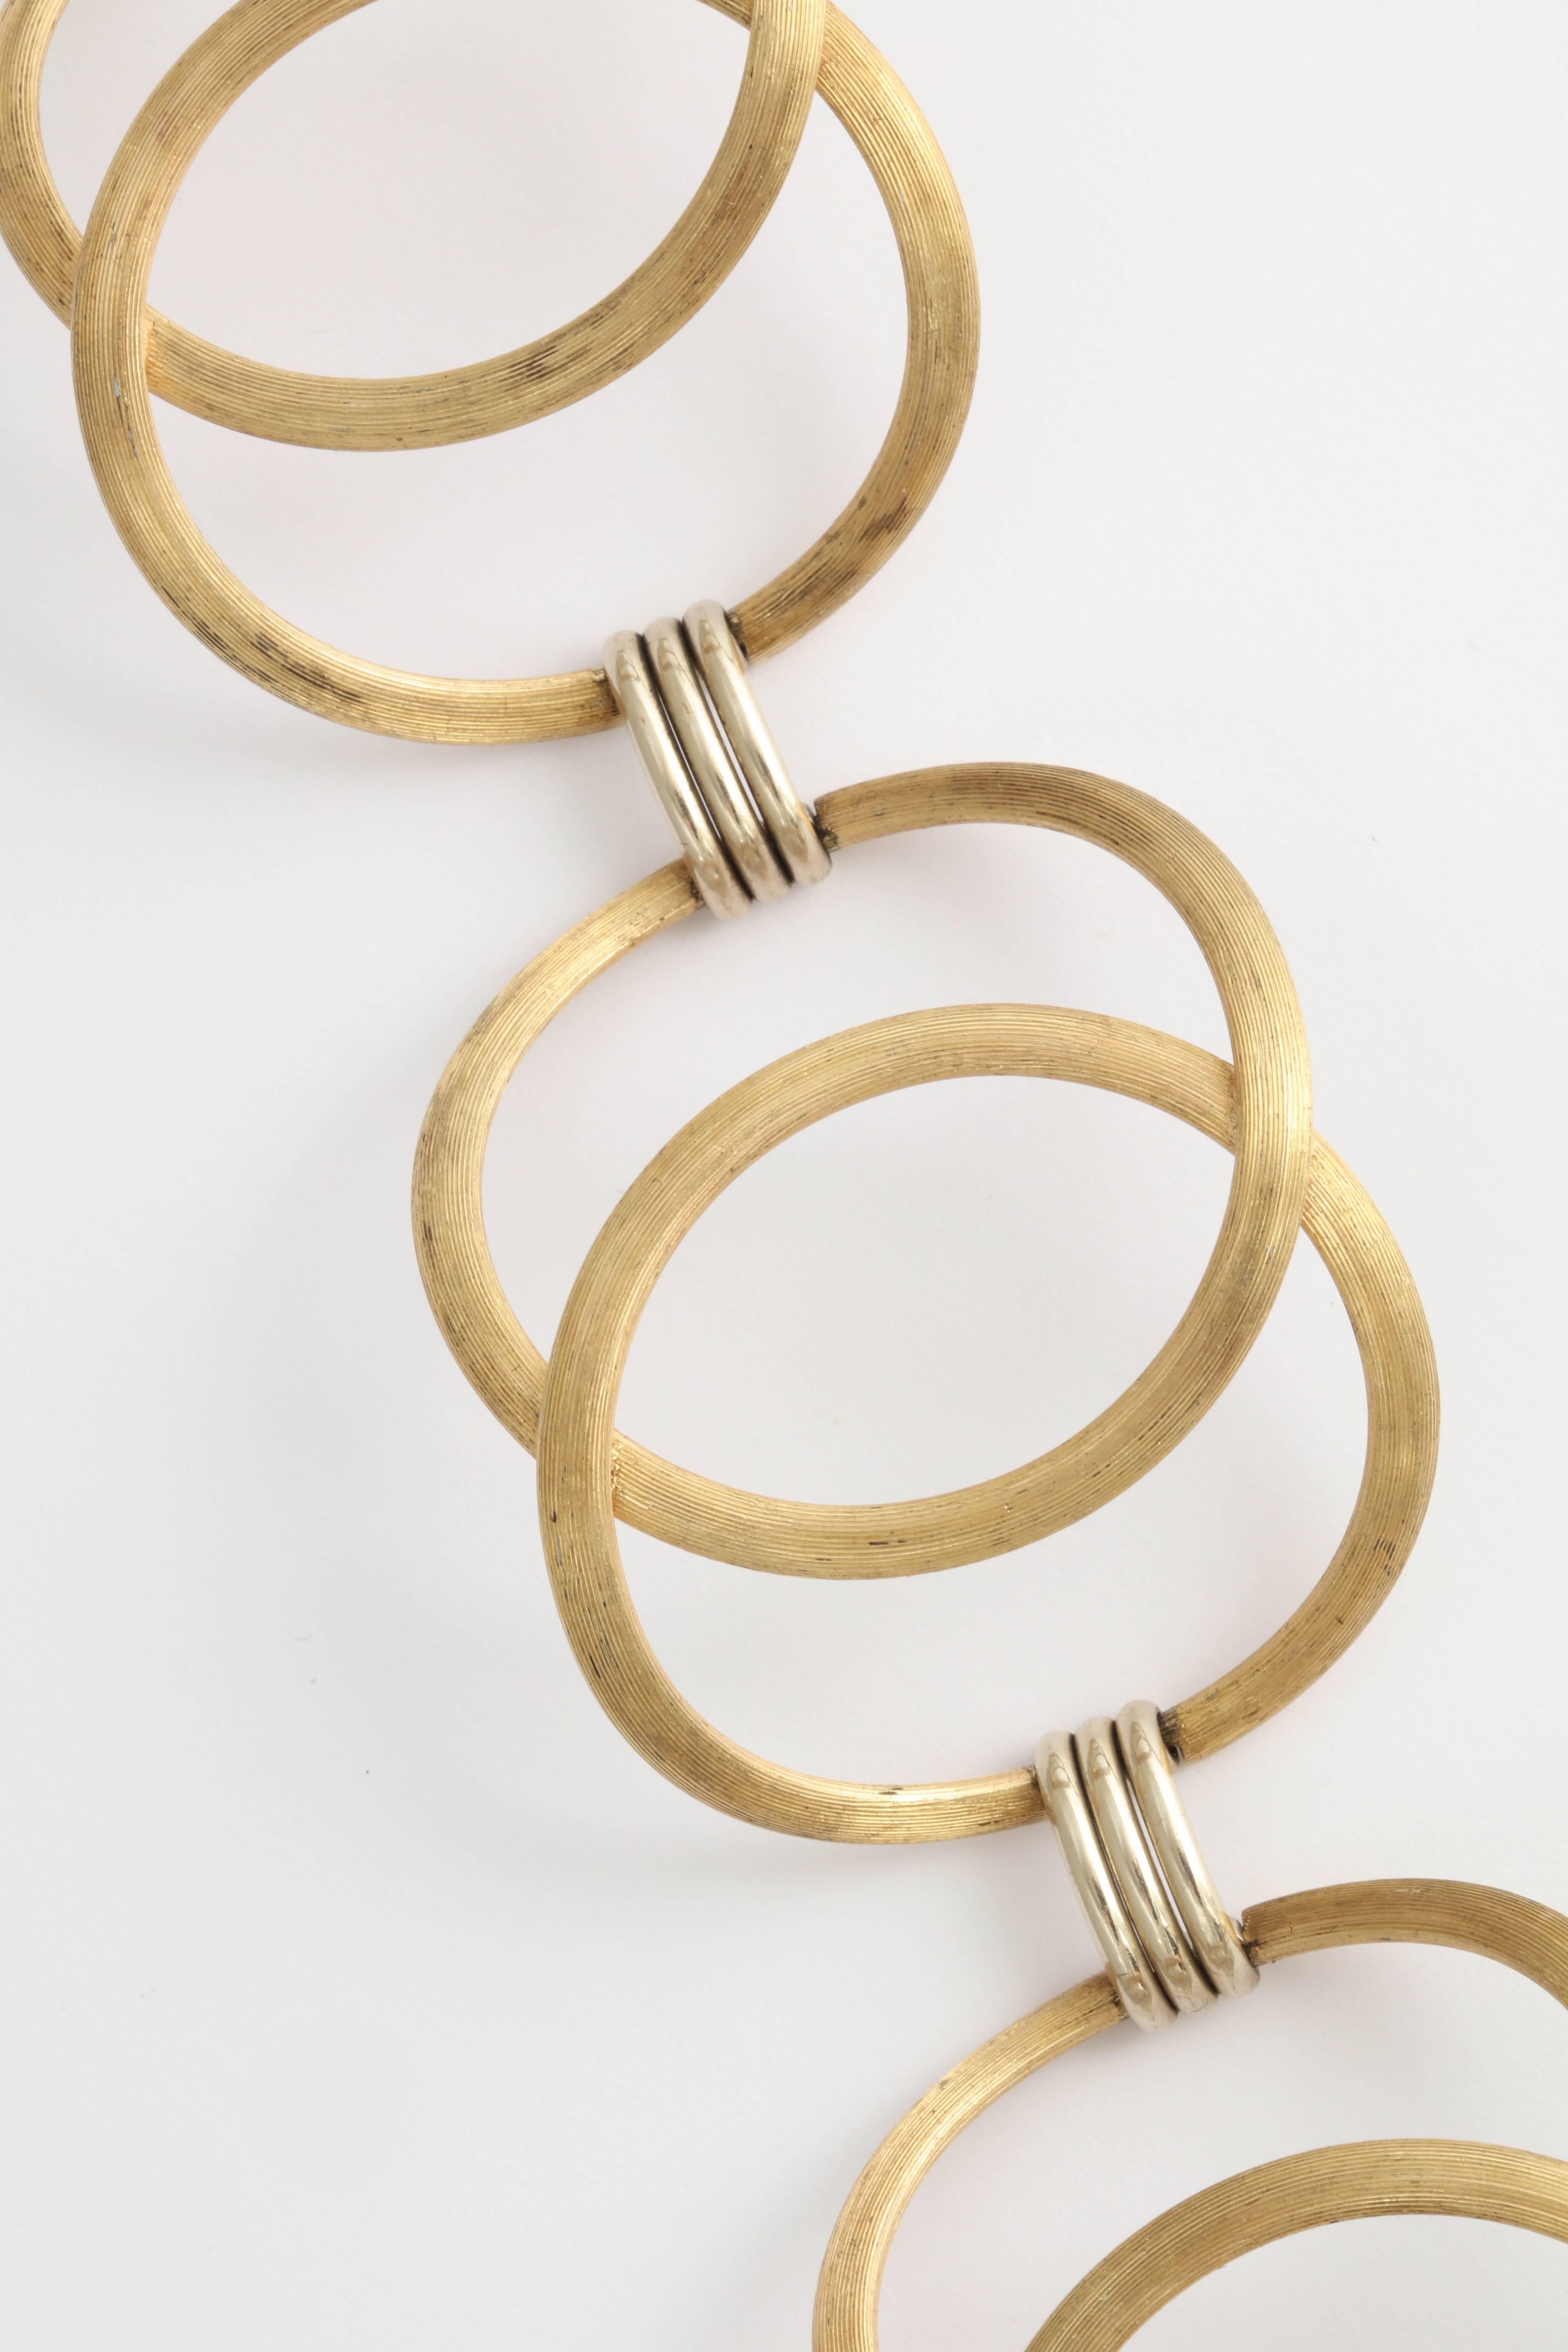 Great 50's-60's oval Link 14kt Yellow Gold brushed & Polished Bracelet.7 1/2" long. Very open & voluminous .  Great link in a light and airy manner.